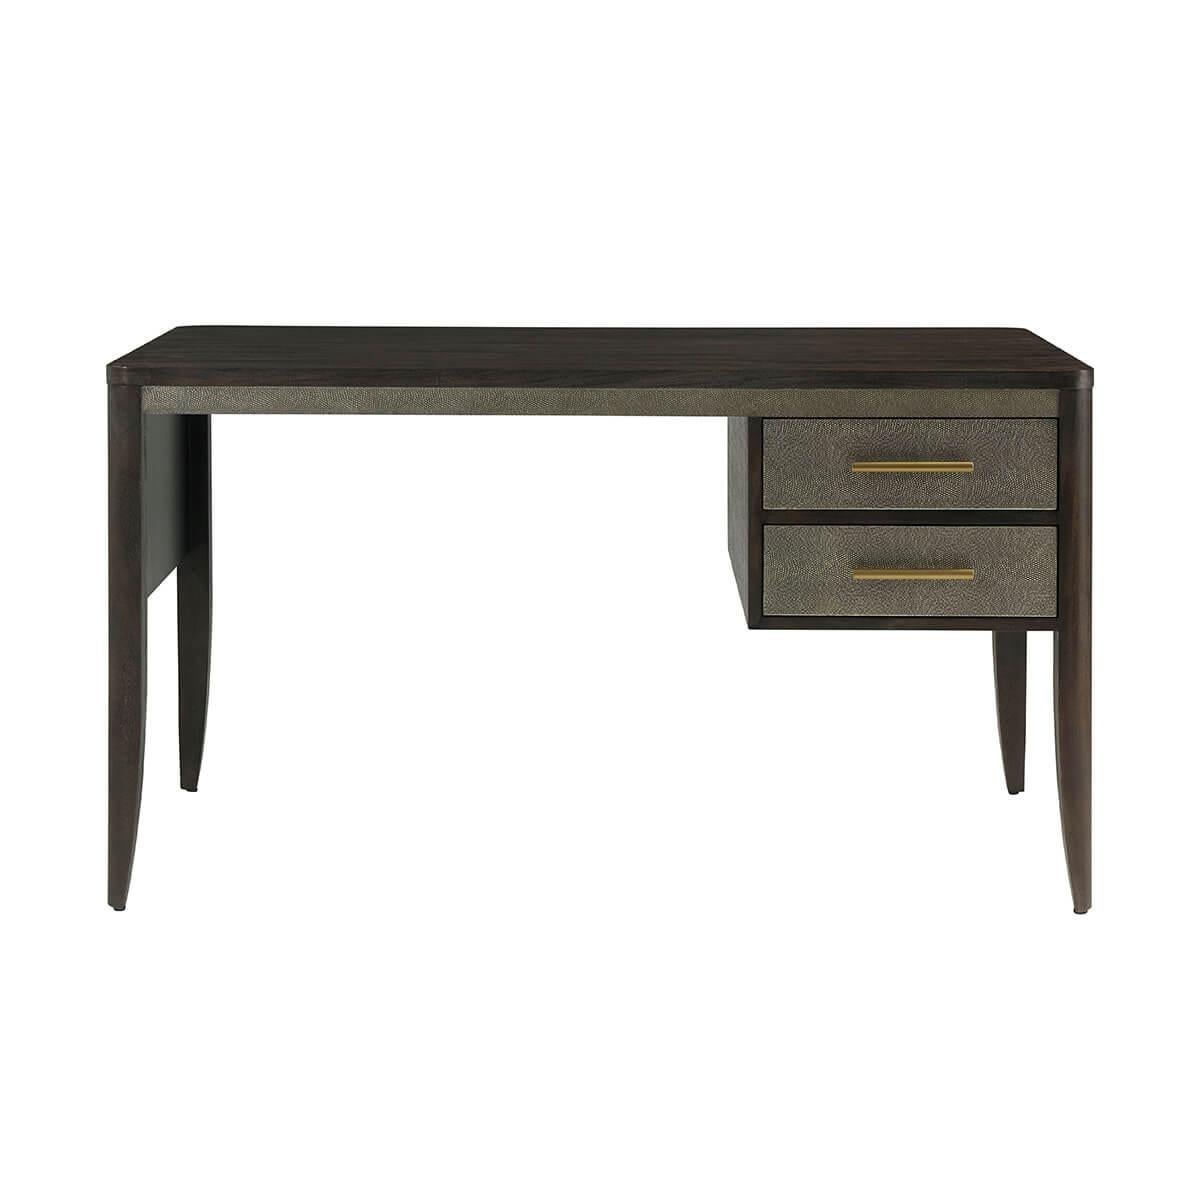 A French two drawer desk with our Rowan beech veneer finish, embossed leather wrapped frieze and drawers with brushed brass finish handles.
Dimensions: 54